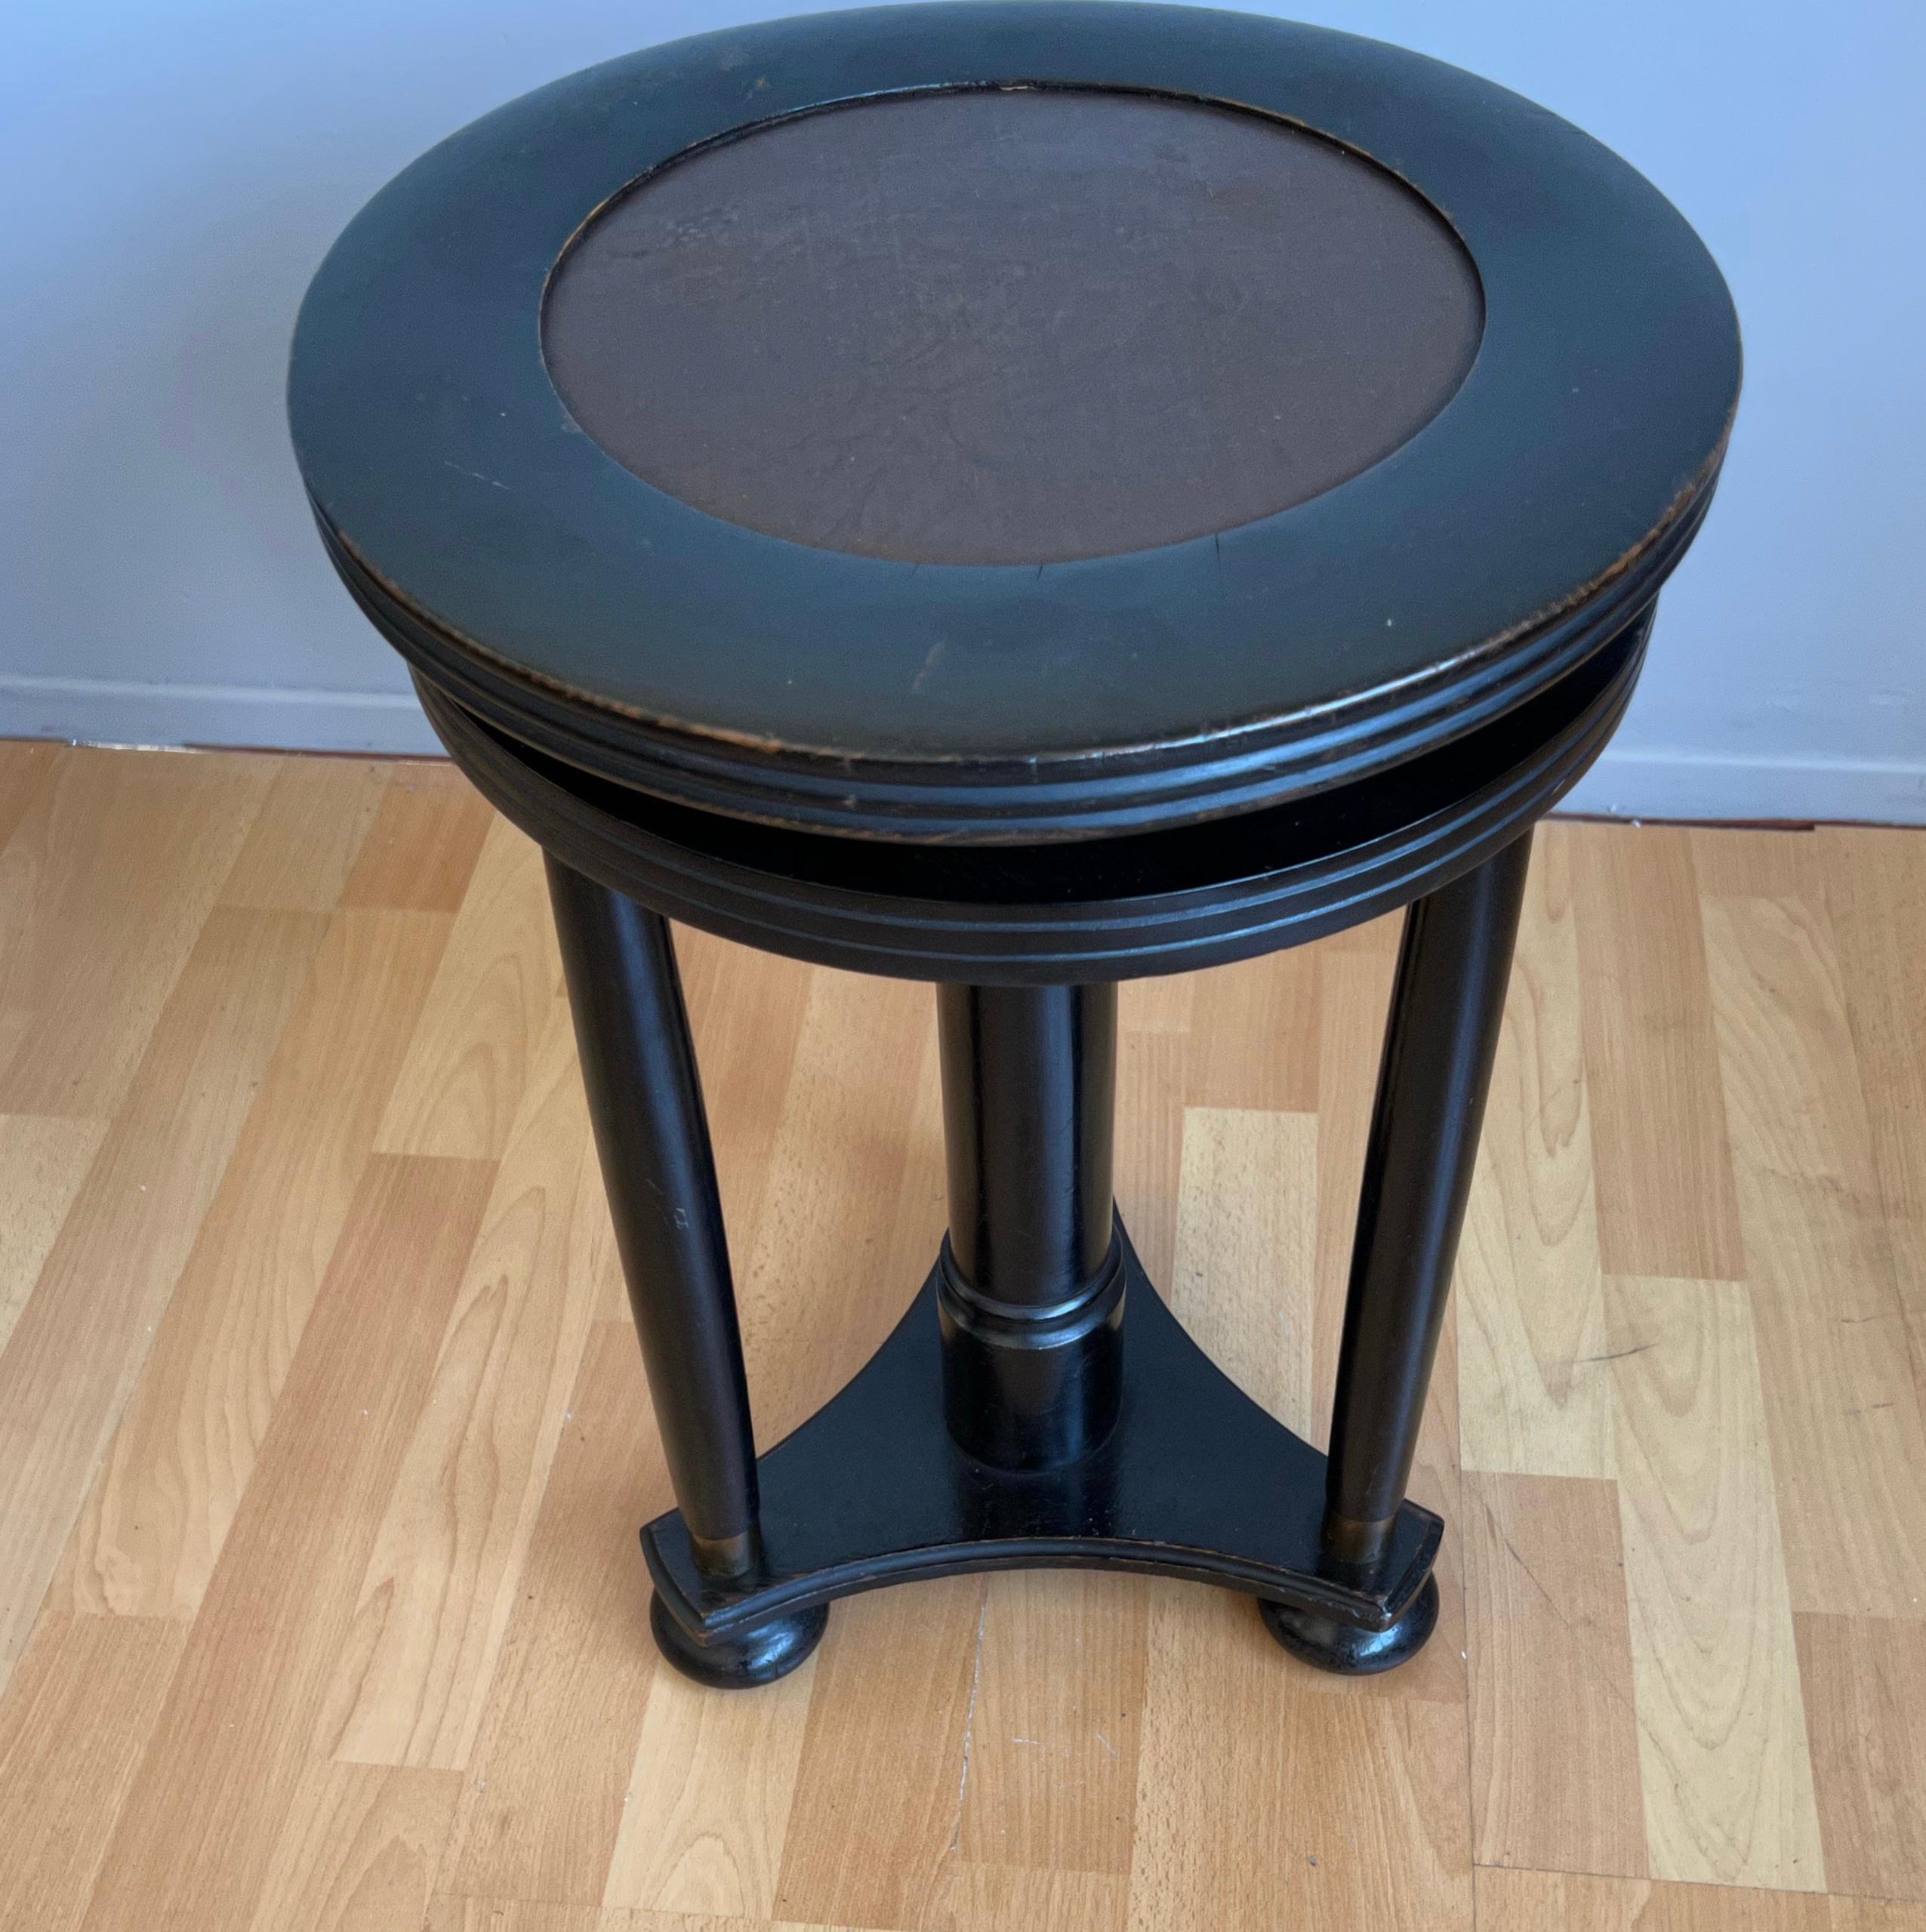 Stylish Blackened Wooden and Brass Art Deco Desk or Piano Swivel Stool, ca 1900 For Sale 7